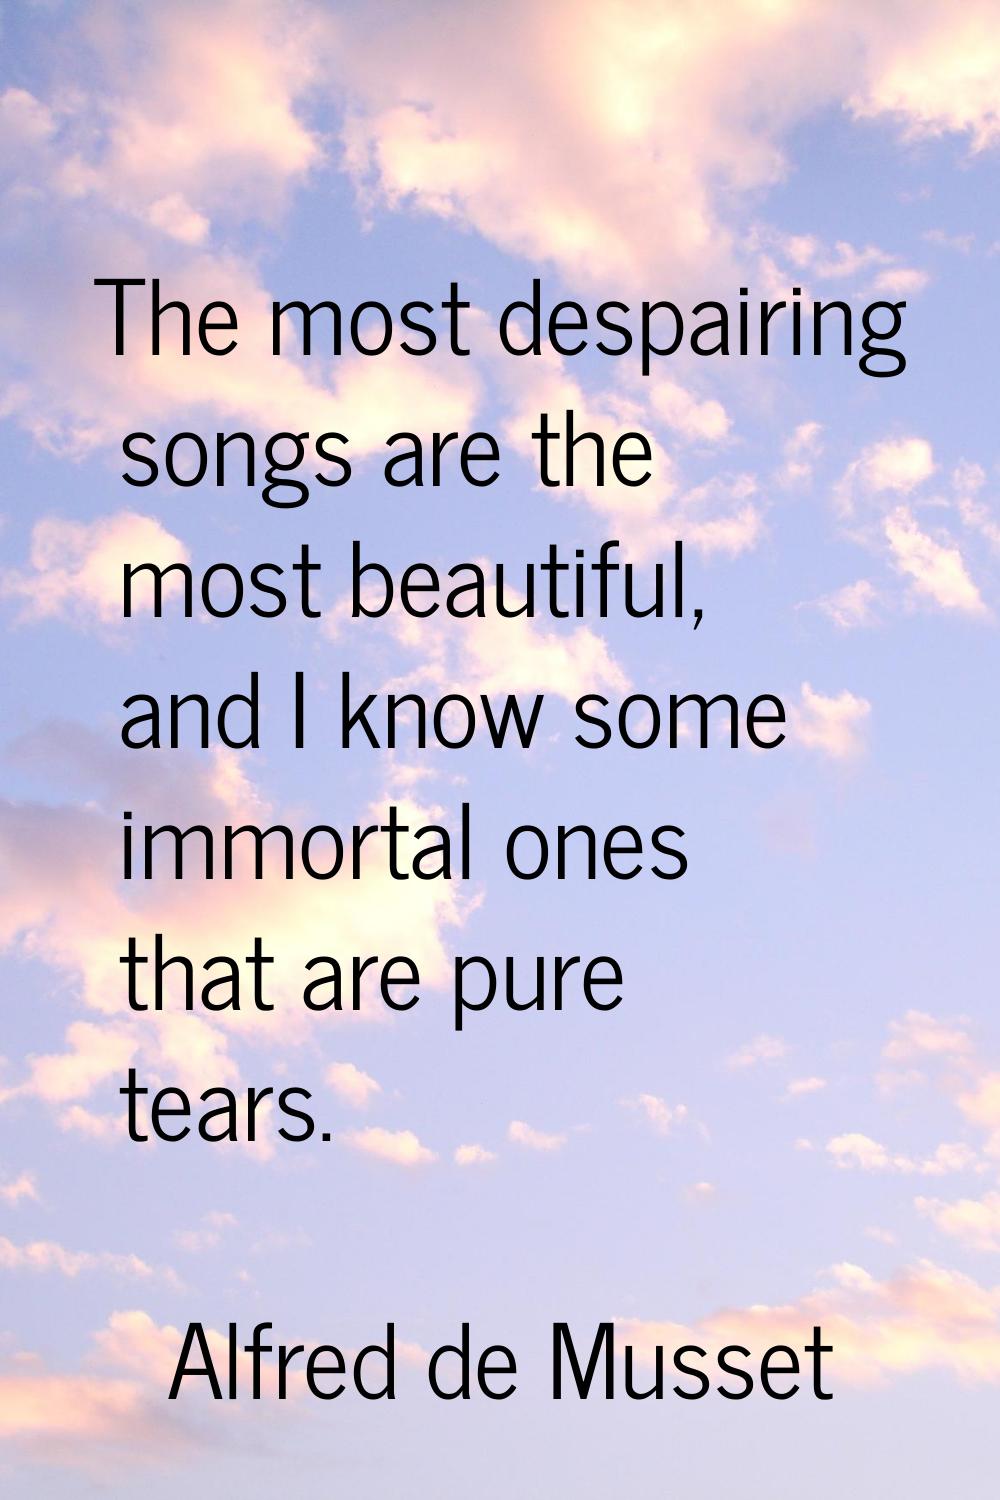 The most despairing songs are the most beautiful, and I know some immortal ones that are pure tears